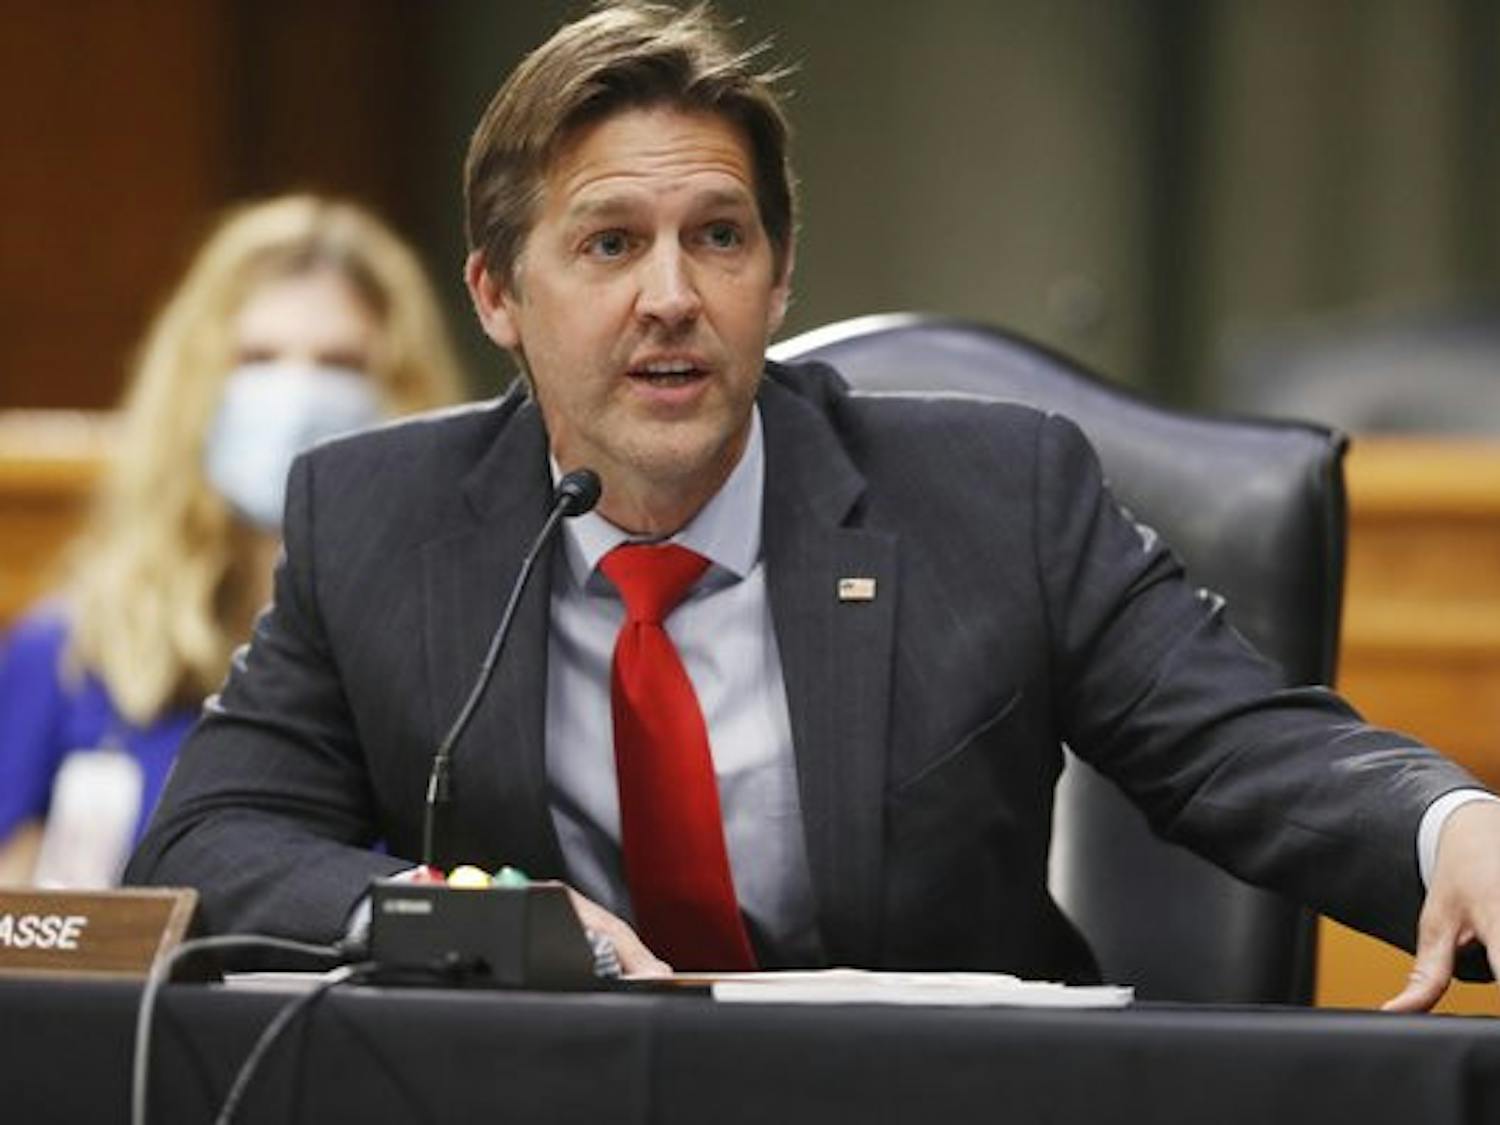 File image of Sen. Ben Sasse from The Associated Press.﻿